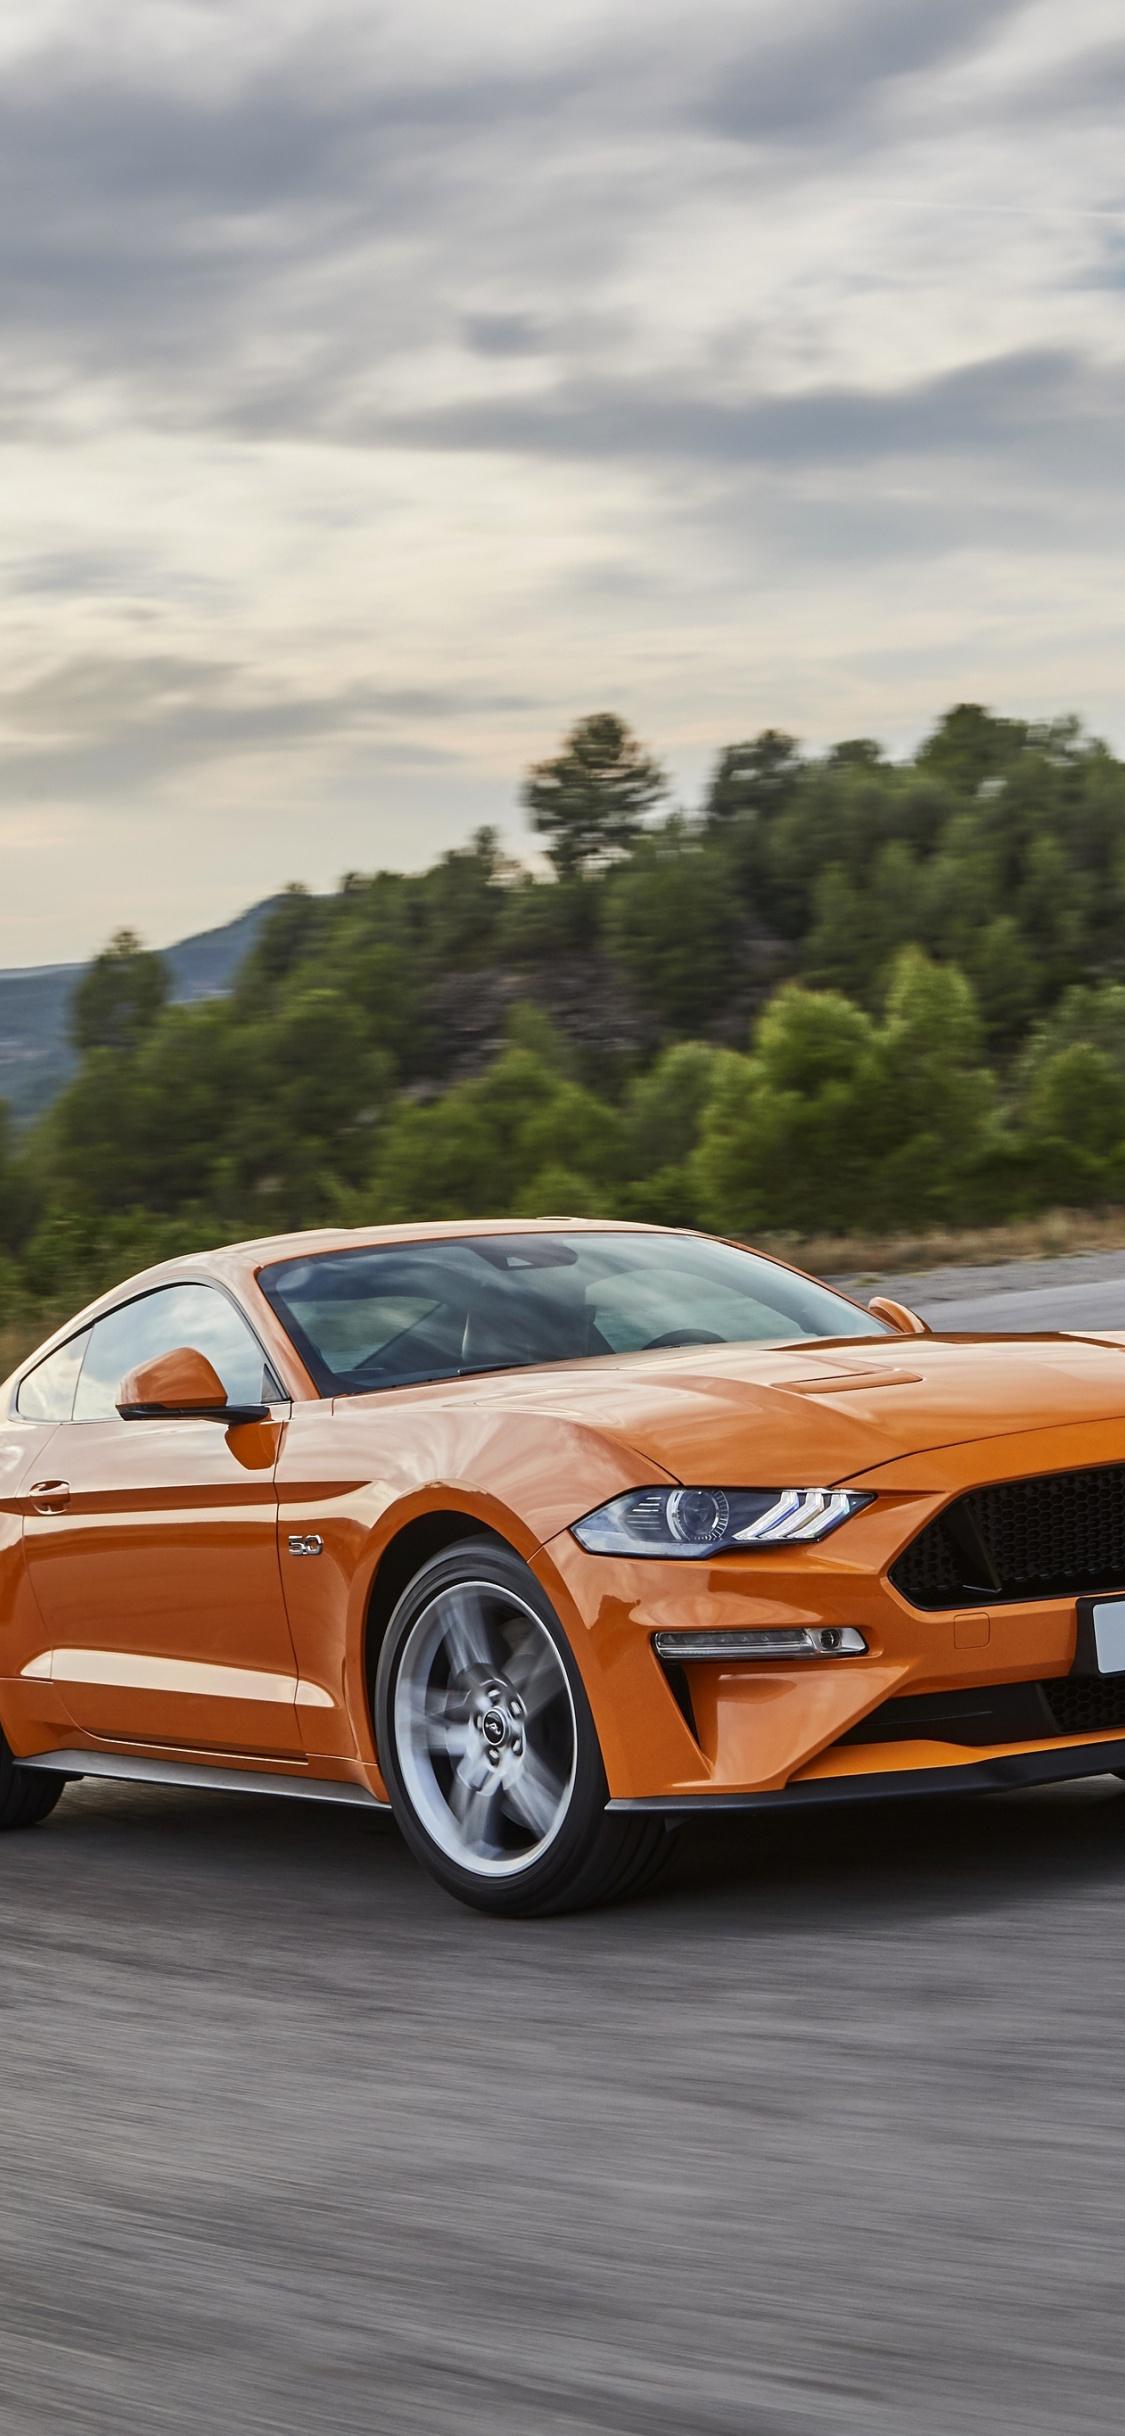 Download 1125x2436 wallpapers ford mustang gt, orange, muscle